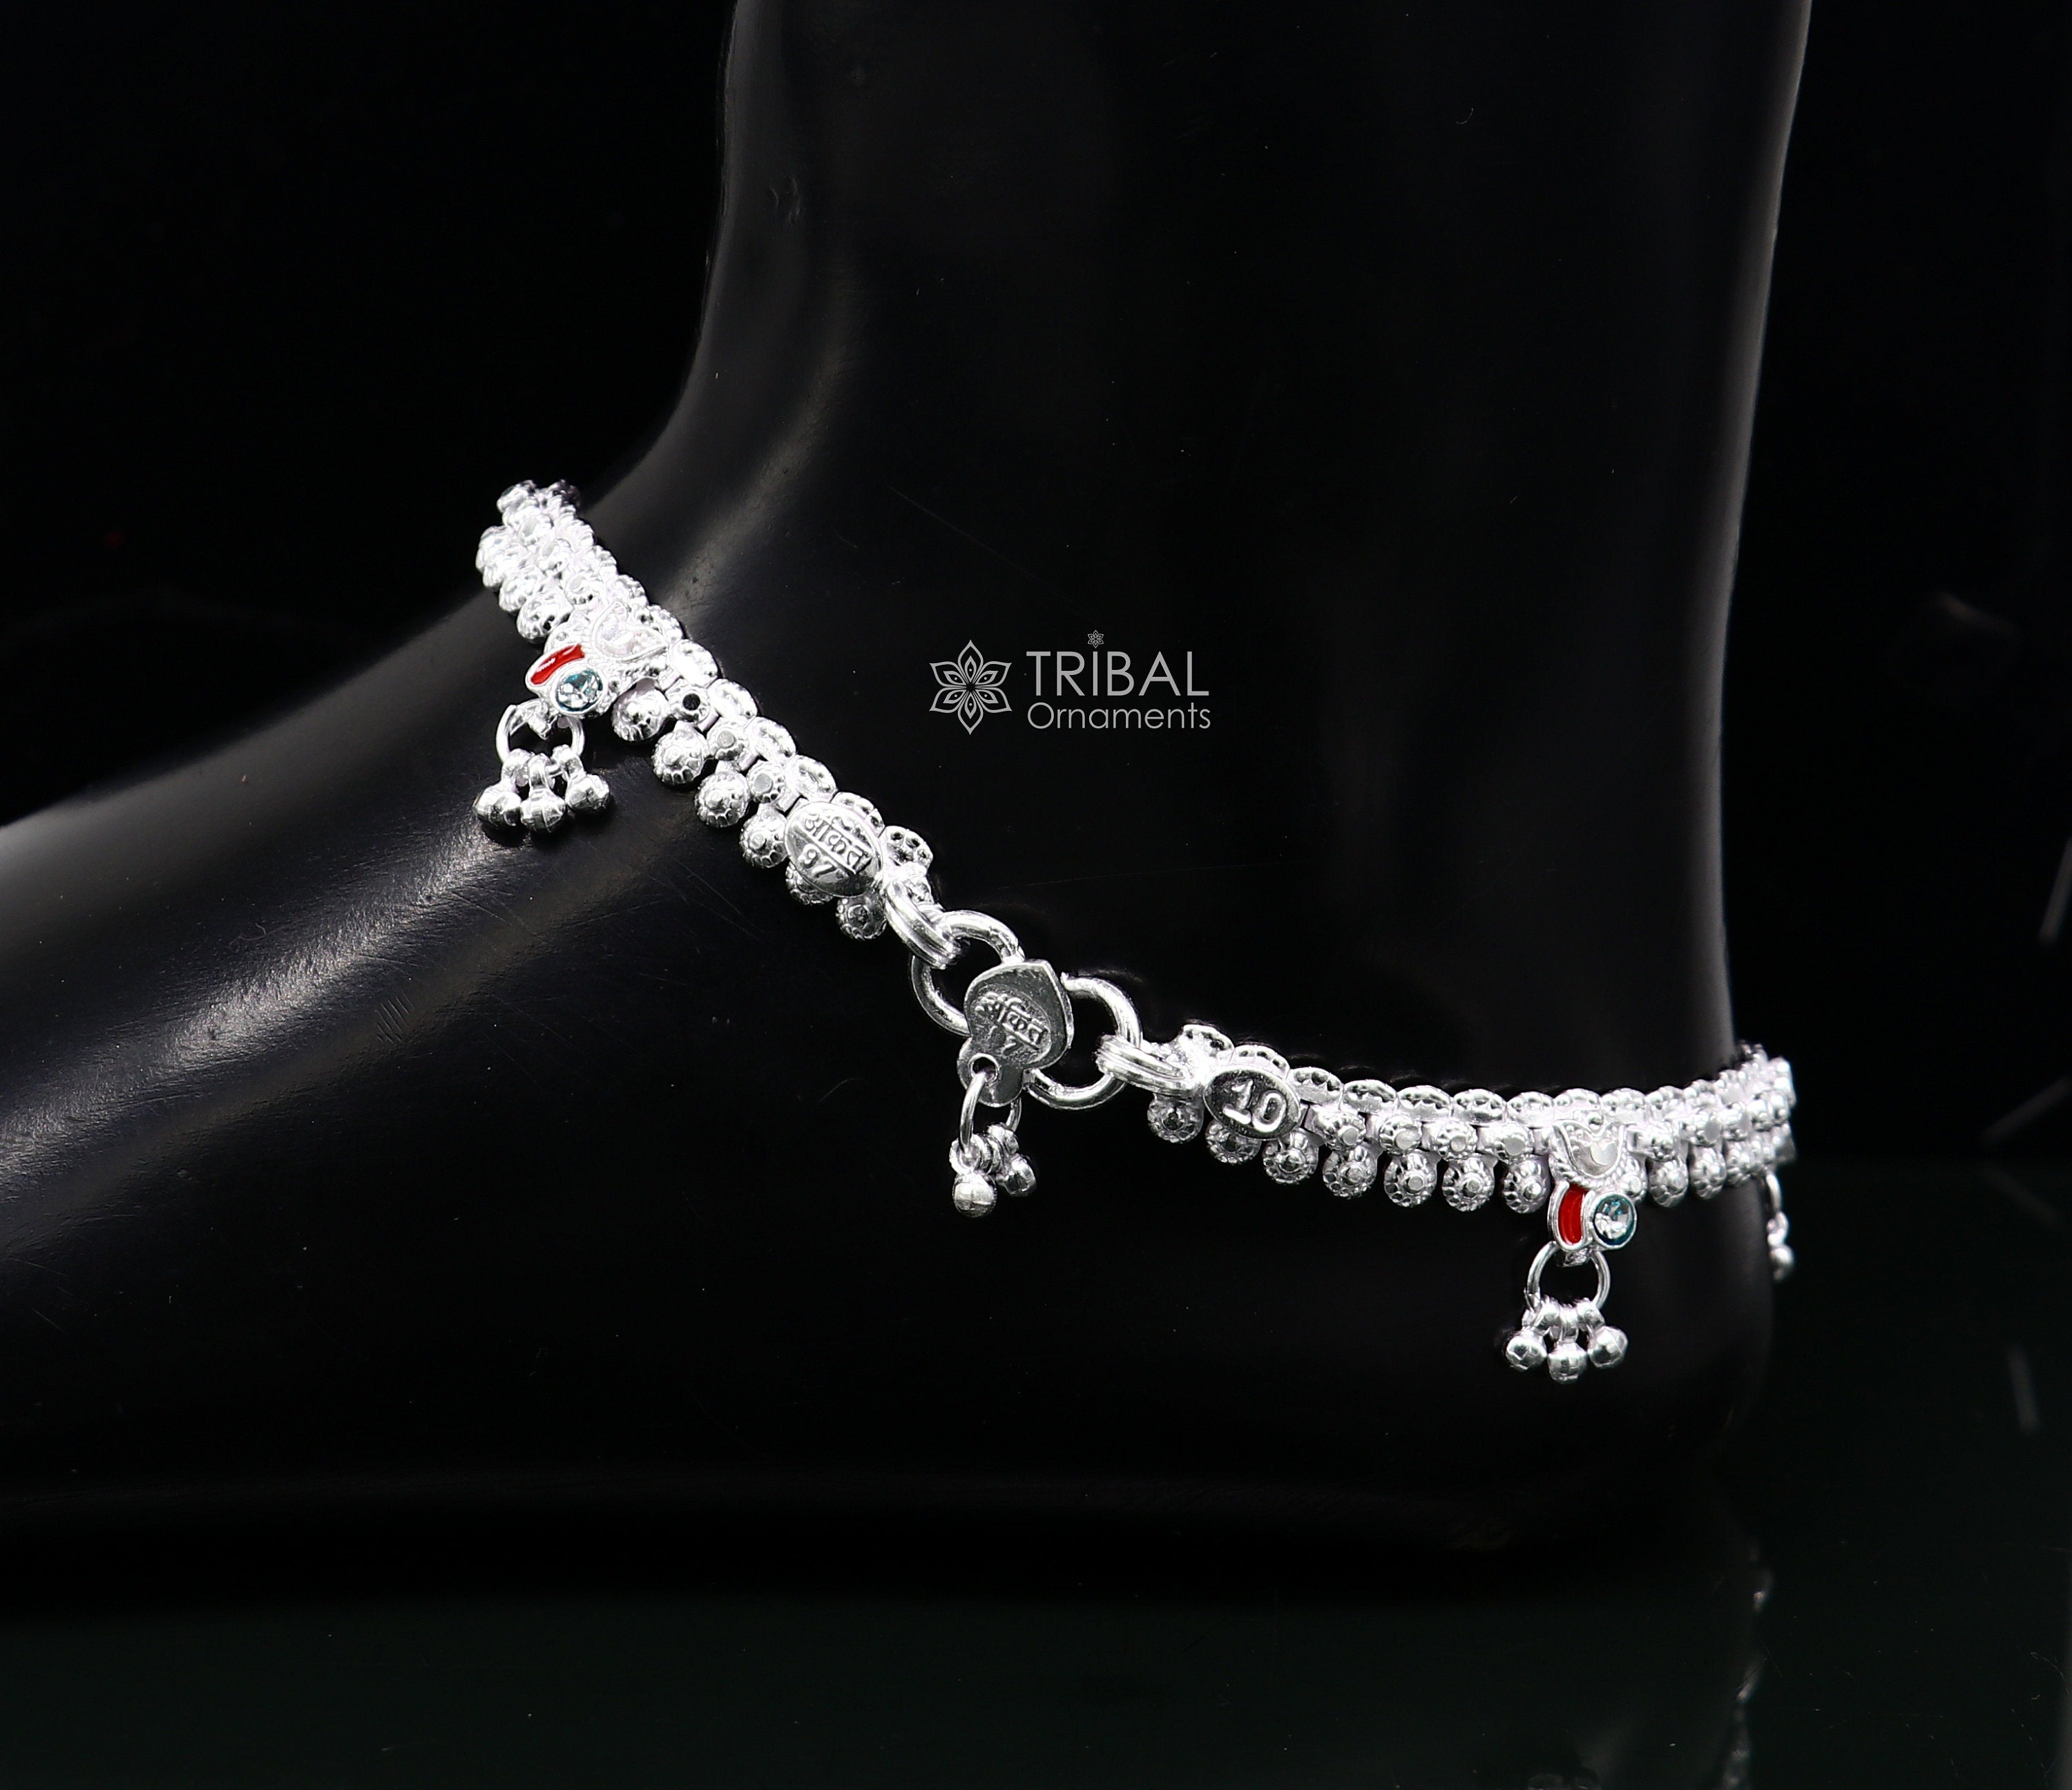 10 ethnic traditional cultural 925 sterling silver handmade vintage design ankle  bracelet excellent tribal brides girls jewelry ank544  TRIBAL ORNAMENTS